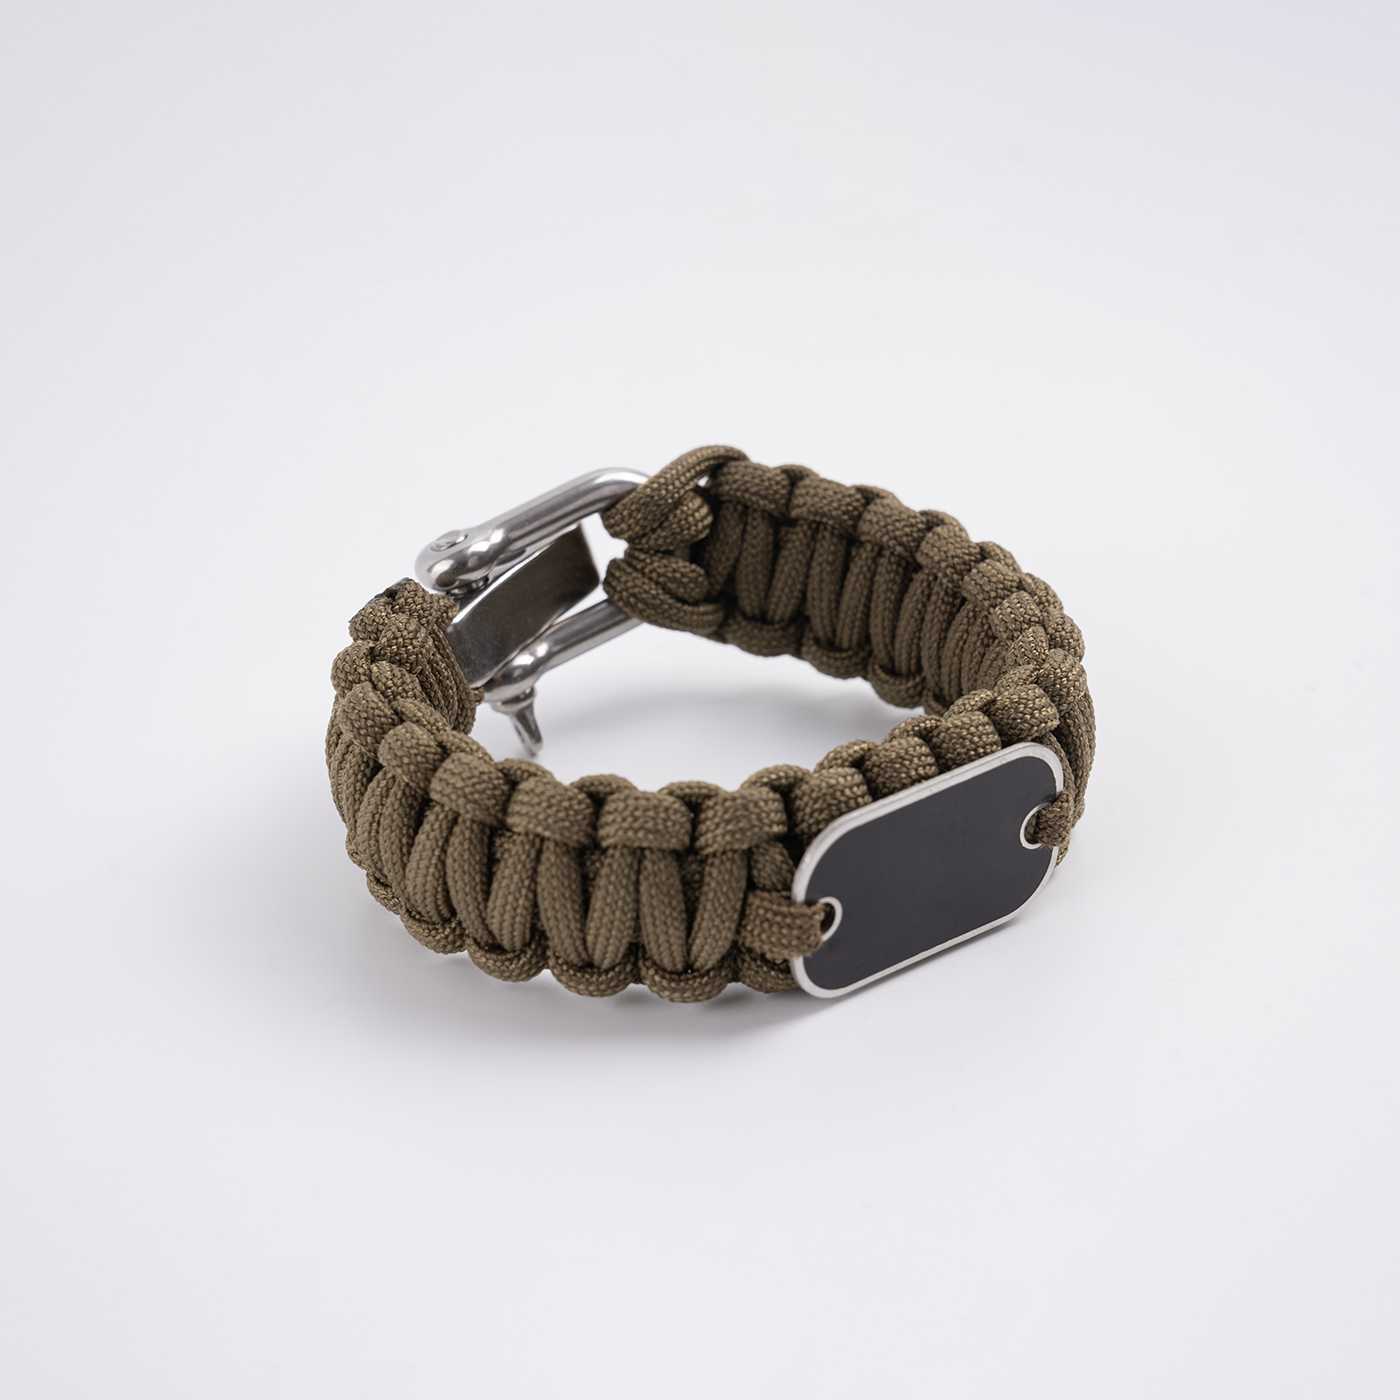 Paracord Survival Bracelet With Nameplate4